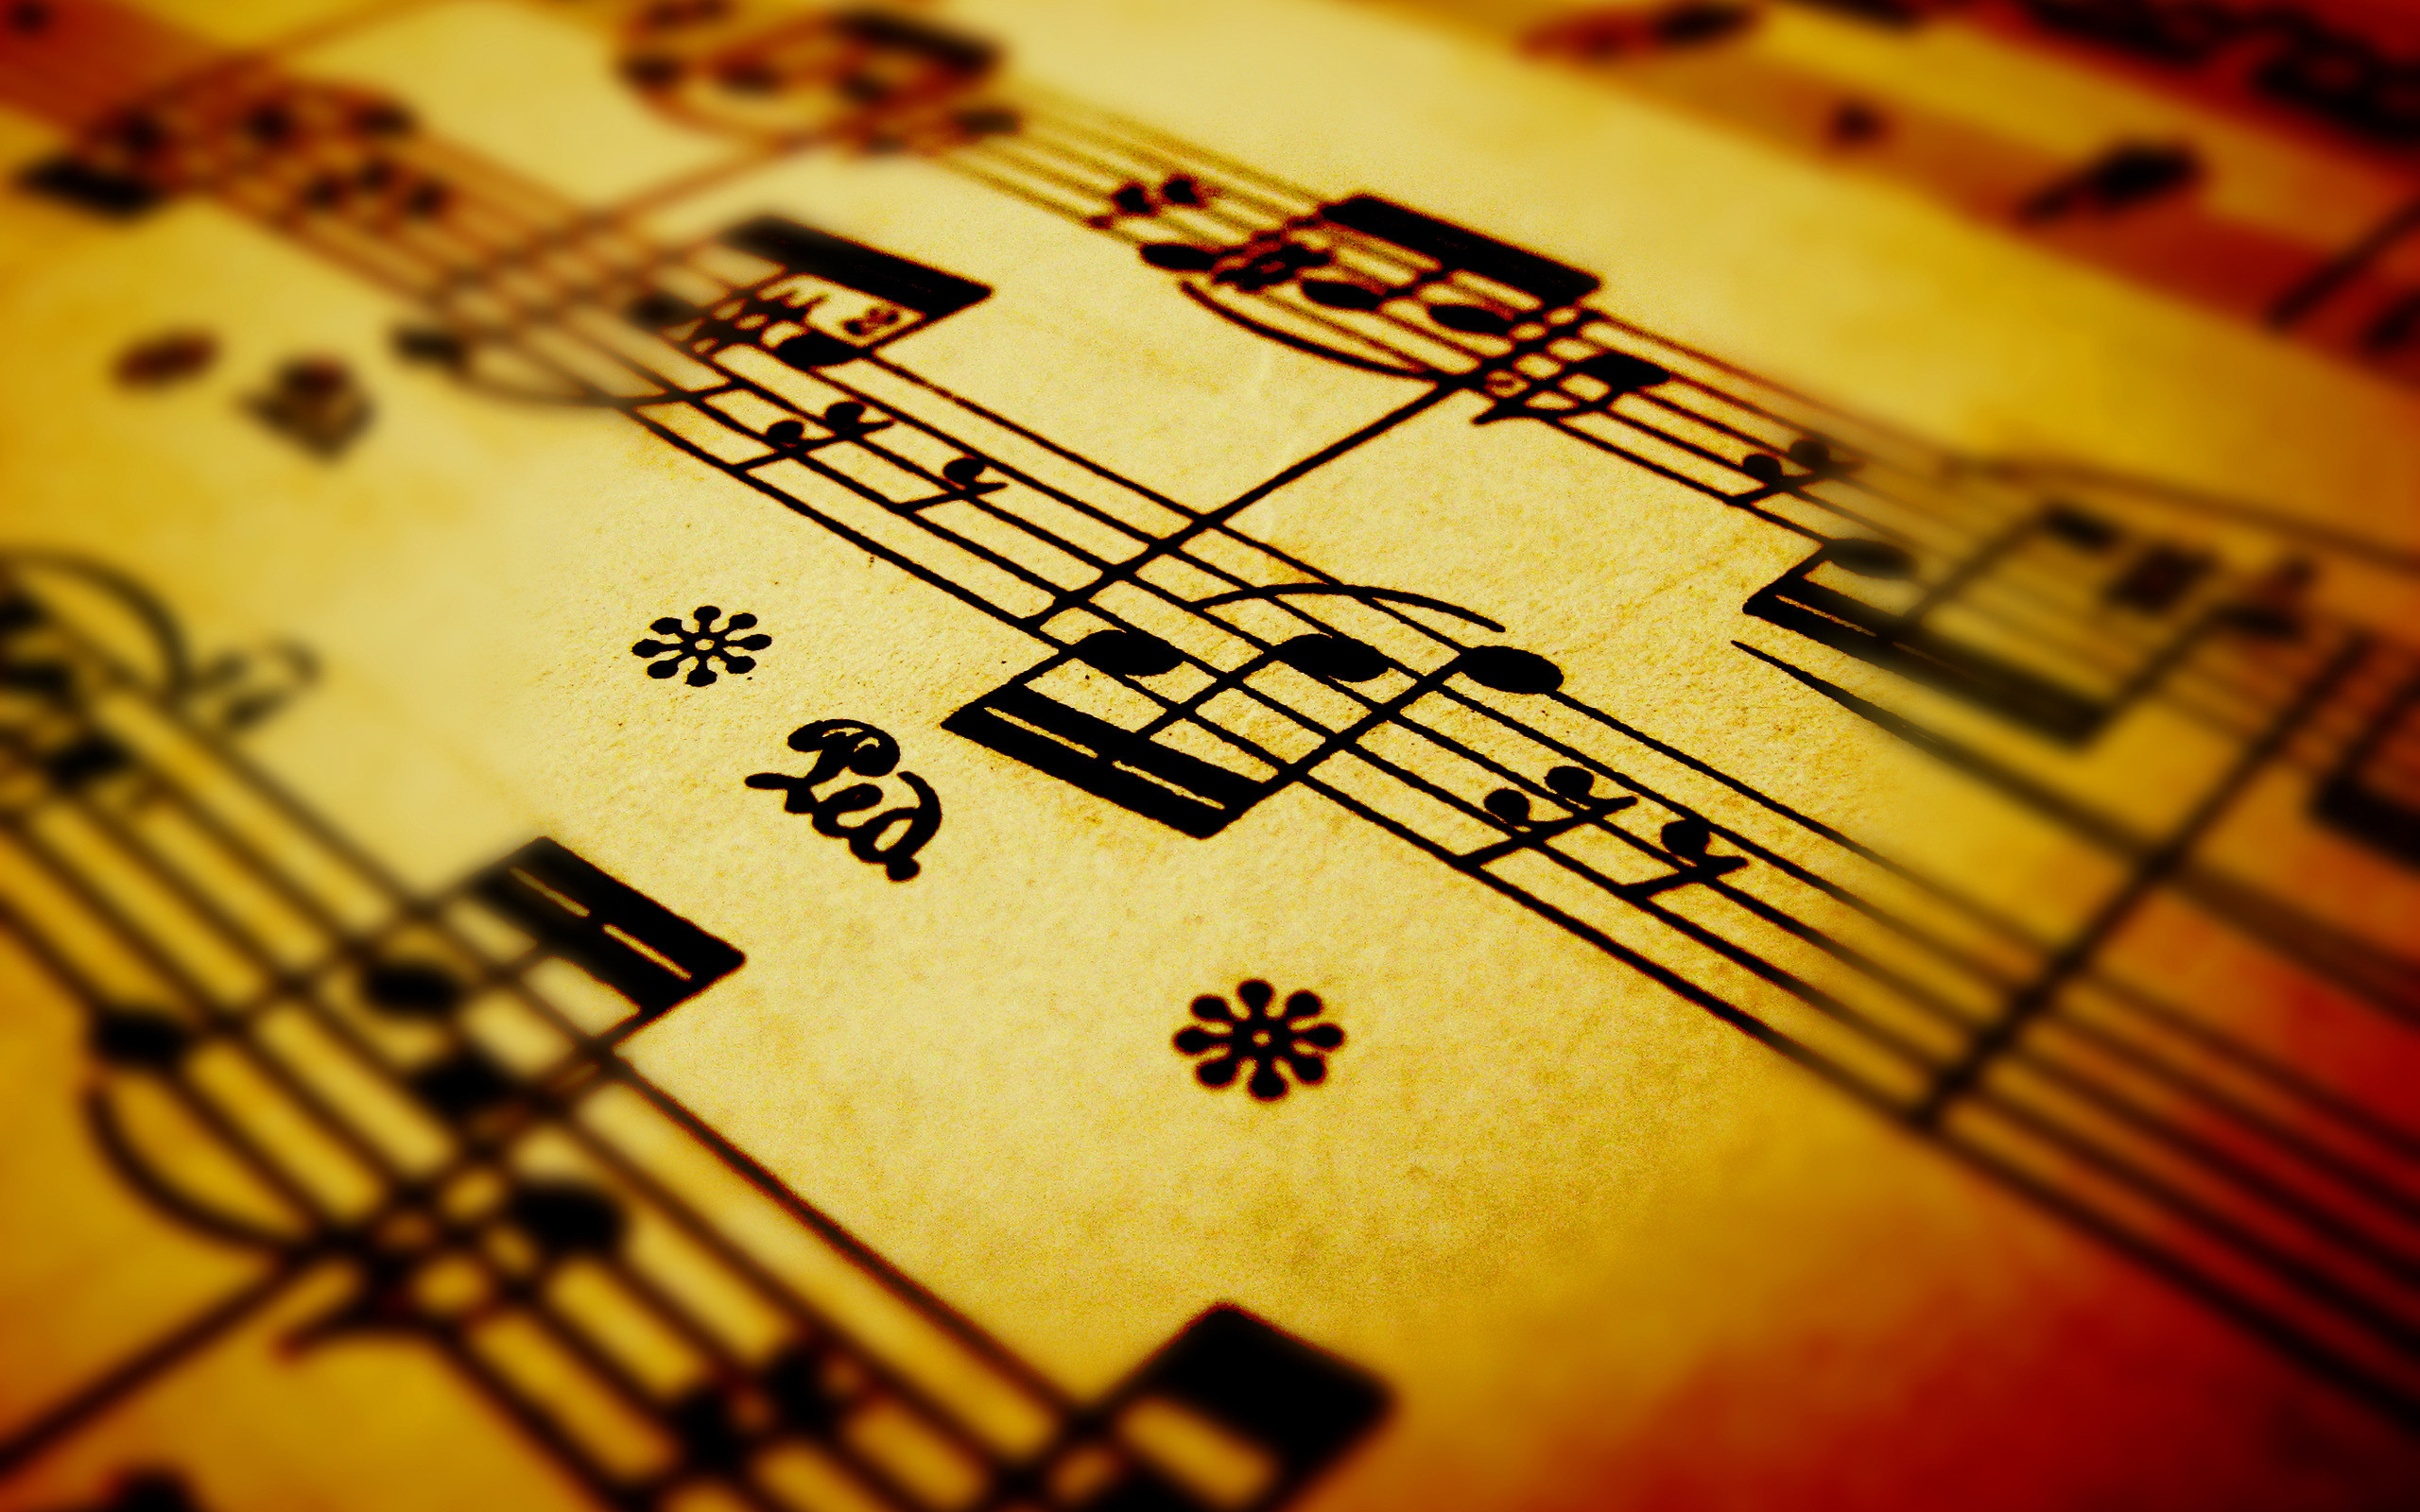 2560x1600 Wallpaper's Collection: Â«Music WallpapersÂ» Free Download Musical Instruments  ...